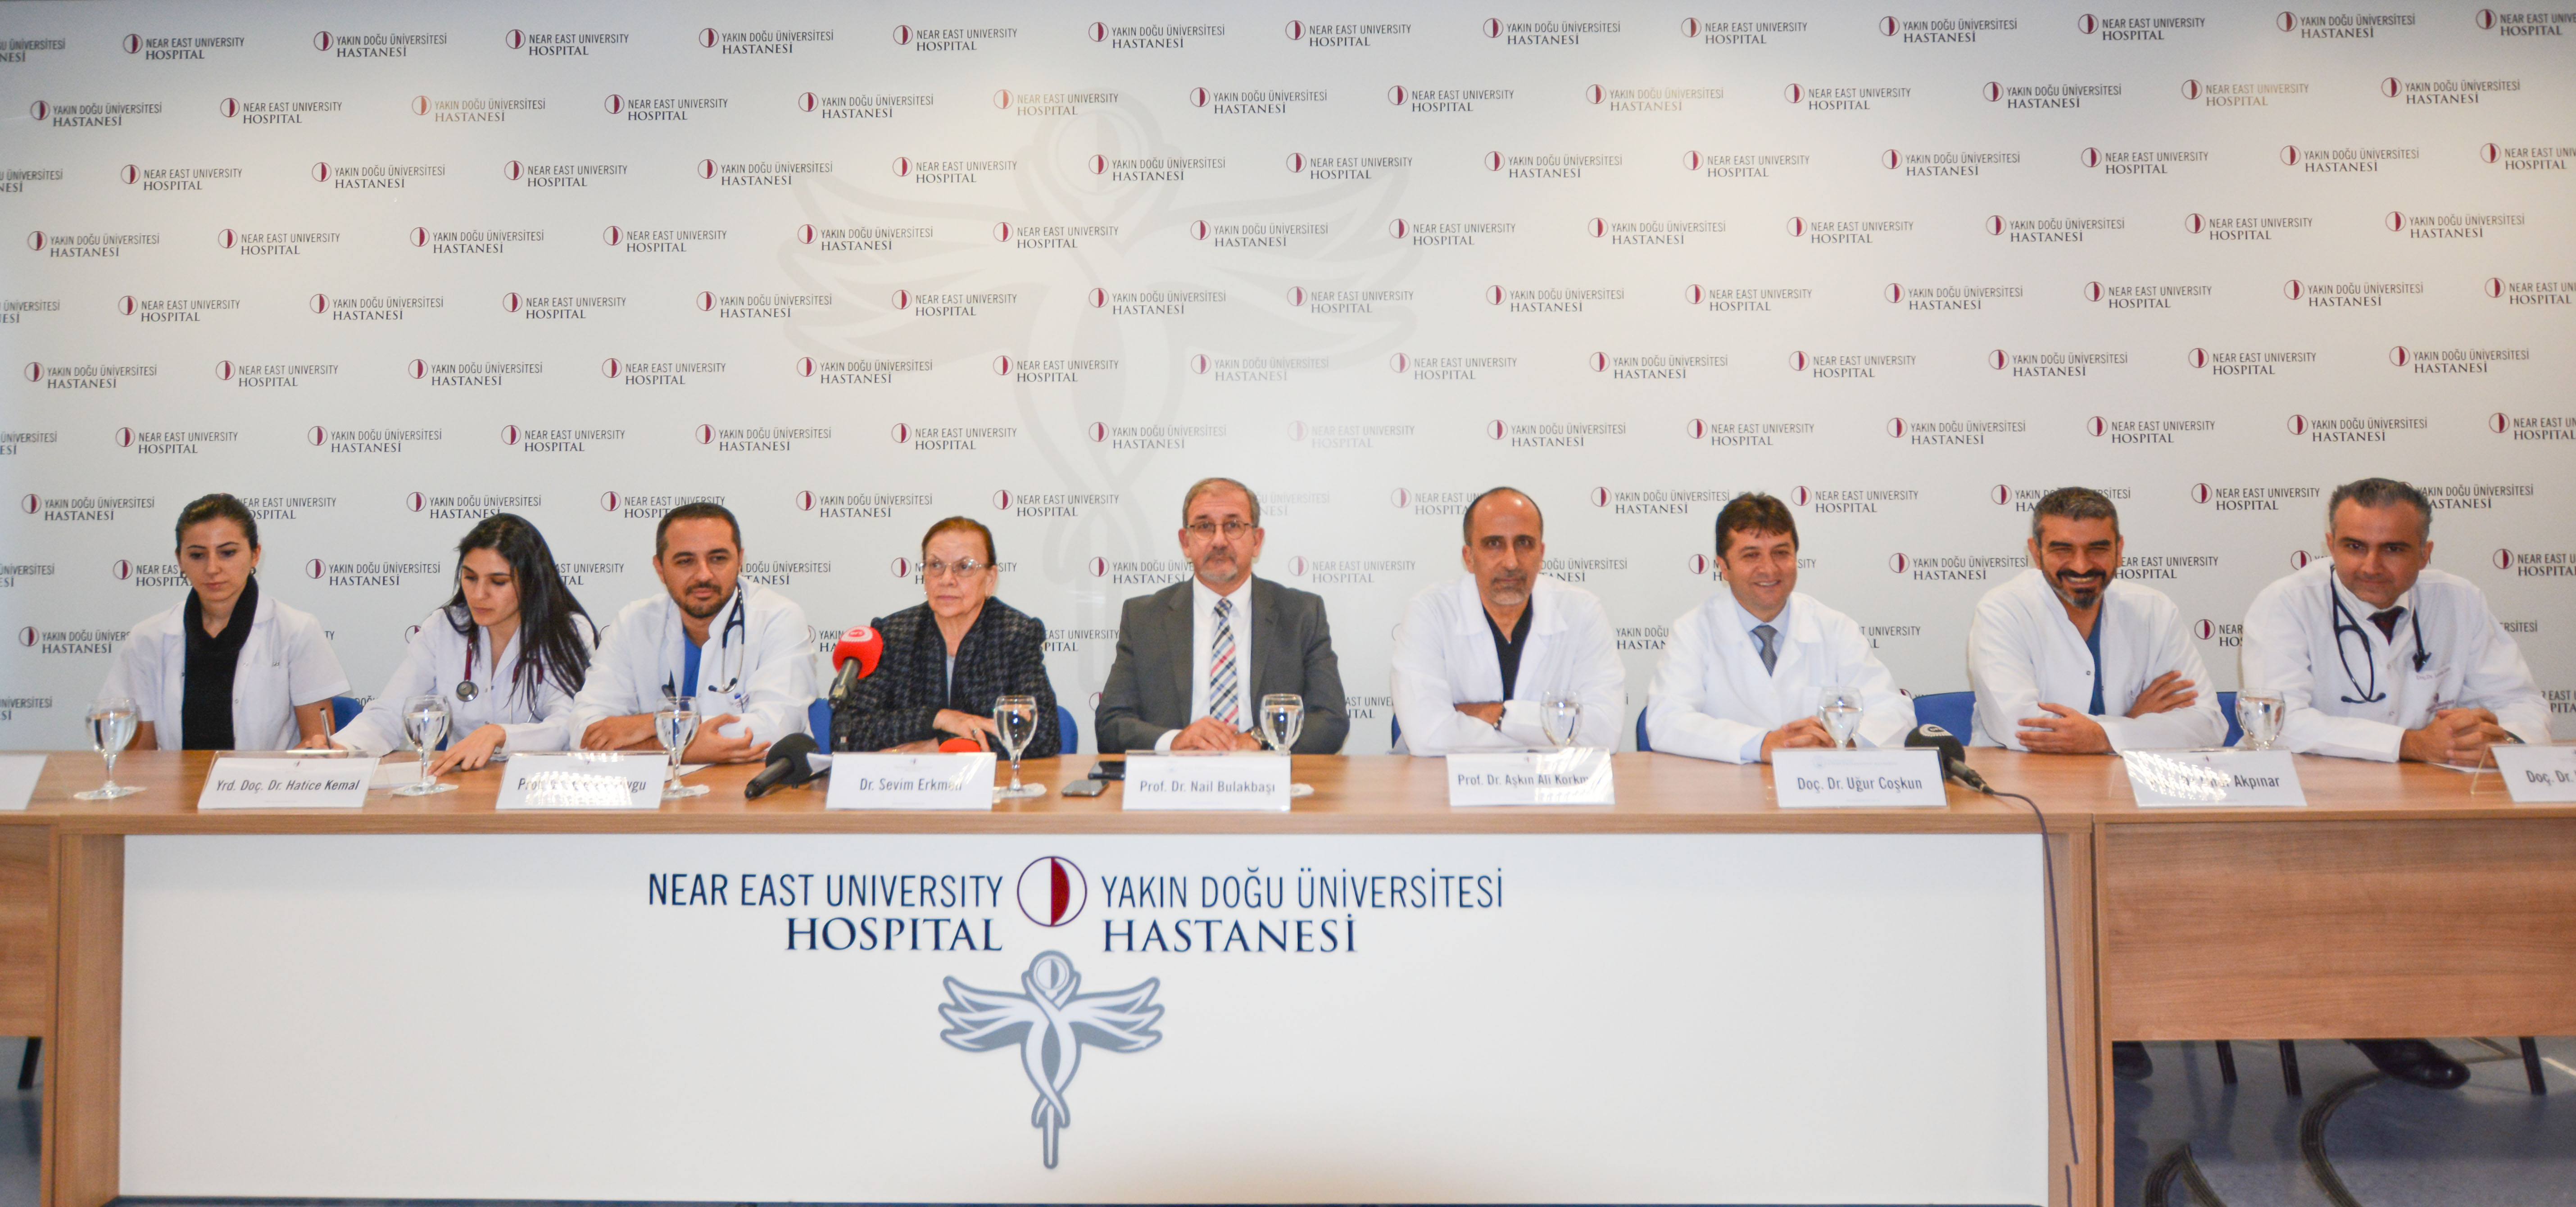 Two University Hospitals jointly founded a Coronary Failure Centre